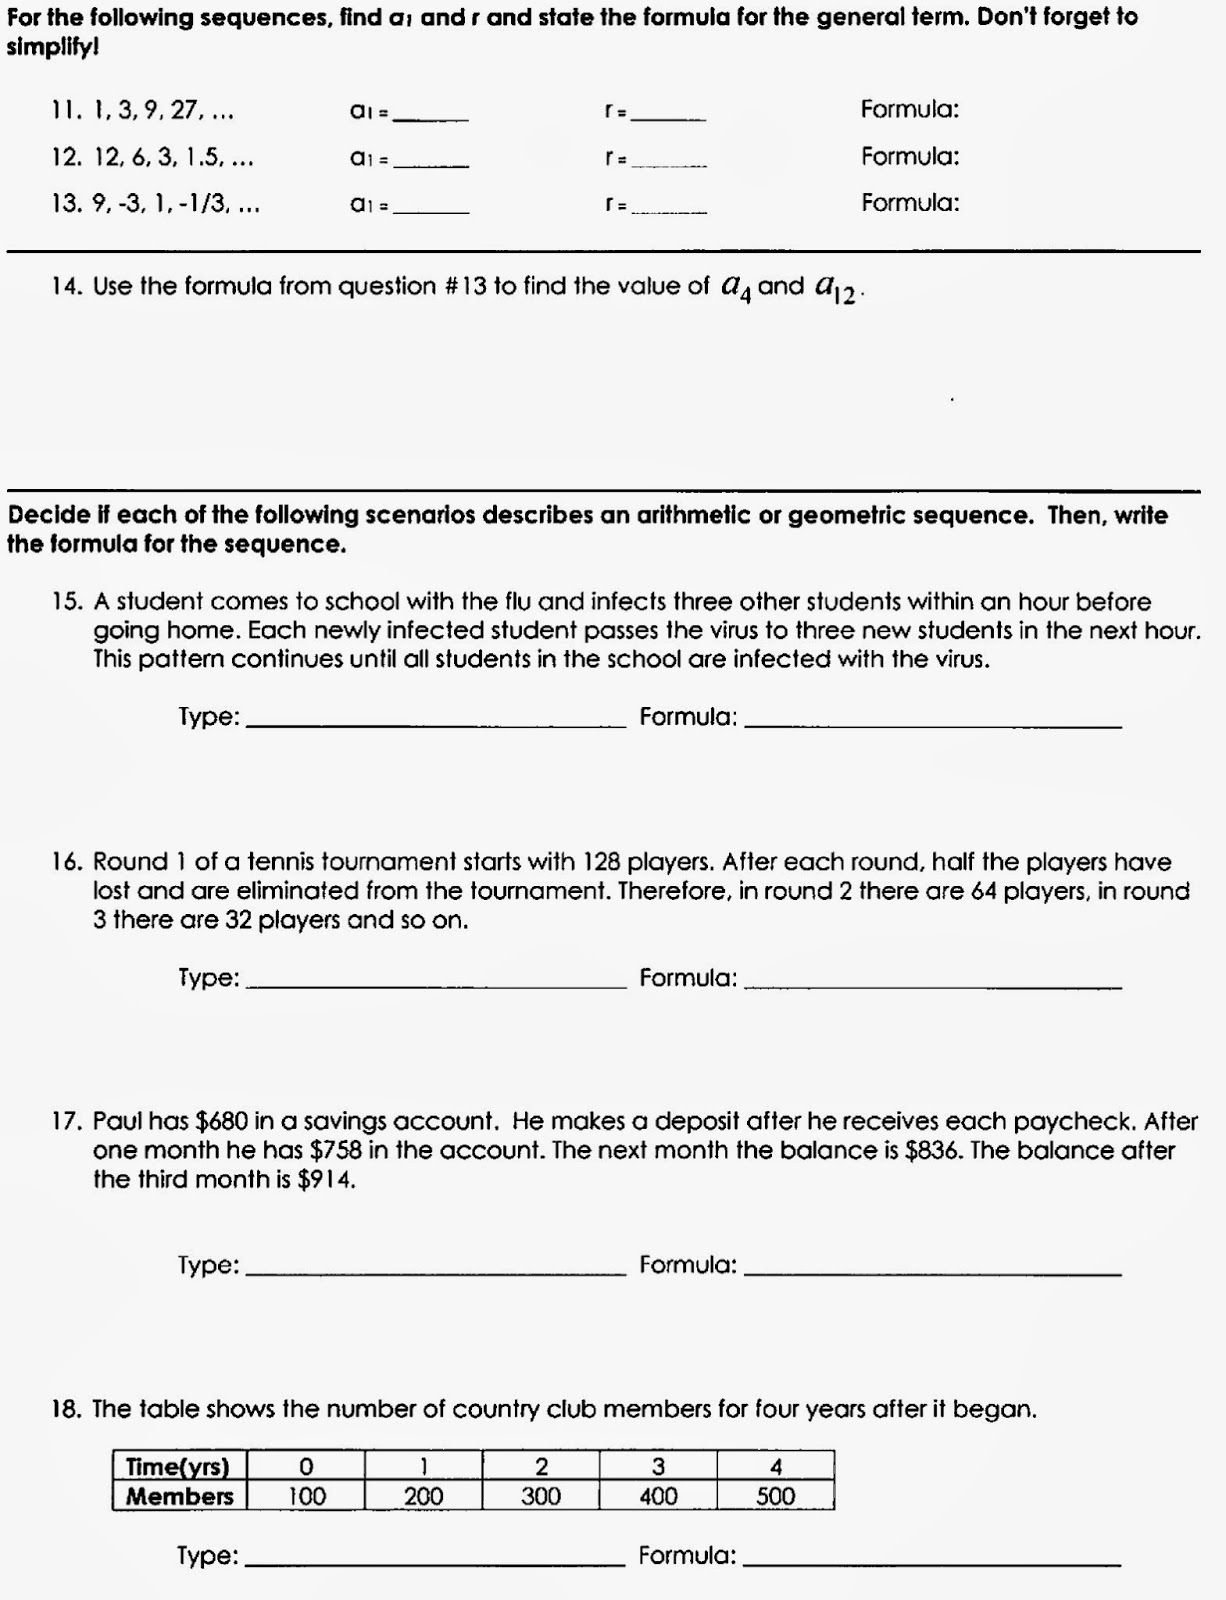 Explicit And Recursive Sequences Practice Worksheet  Coastalbend Throughout Explicit And Recursive Sequences Practice Worksheet